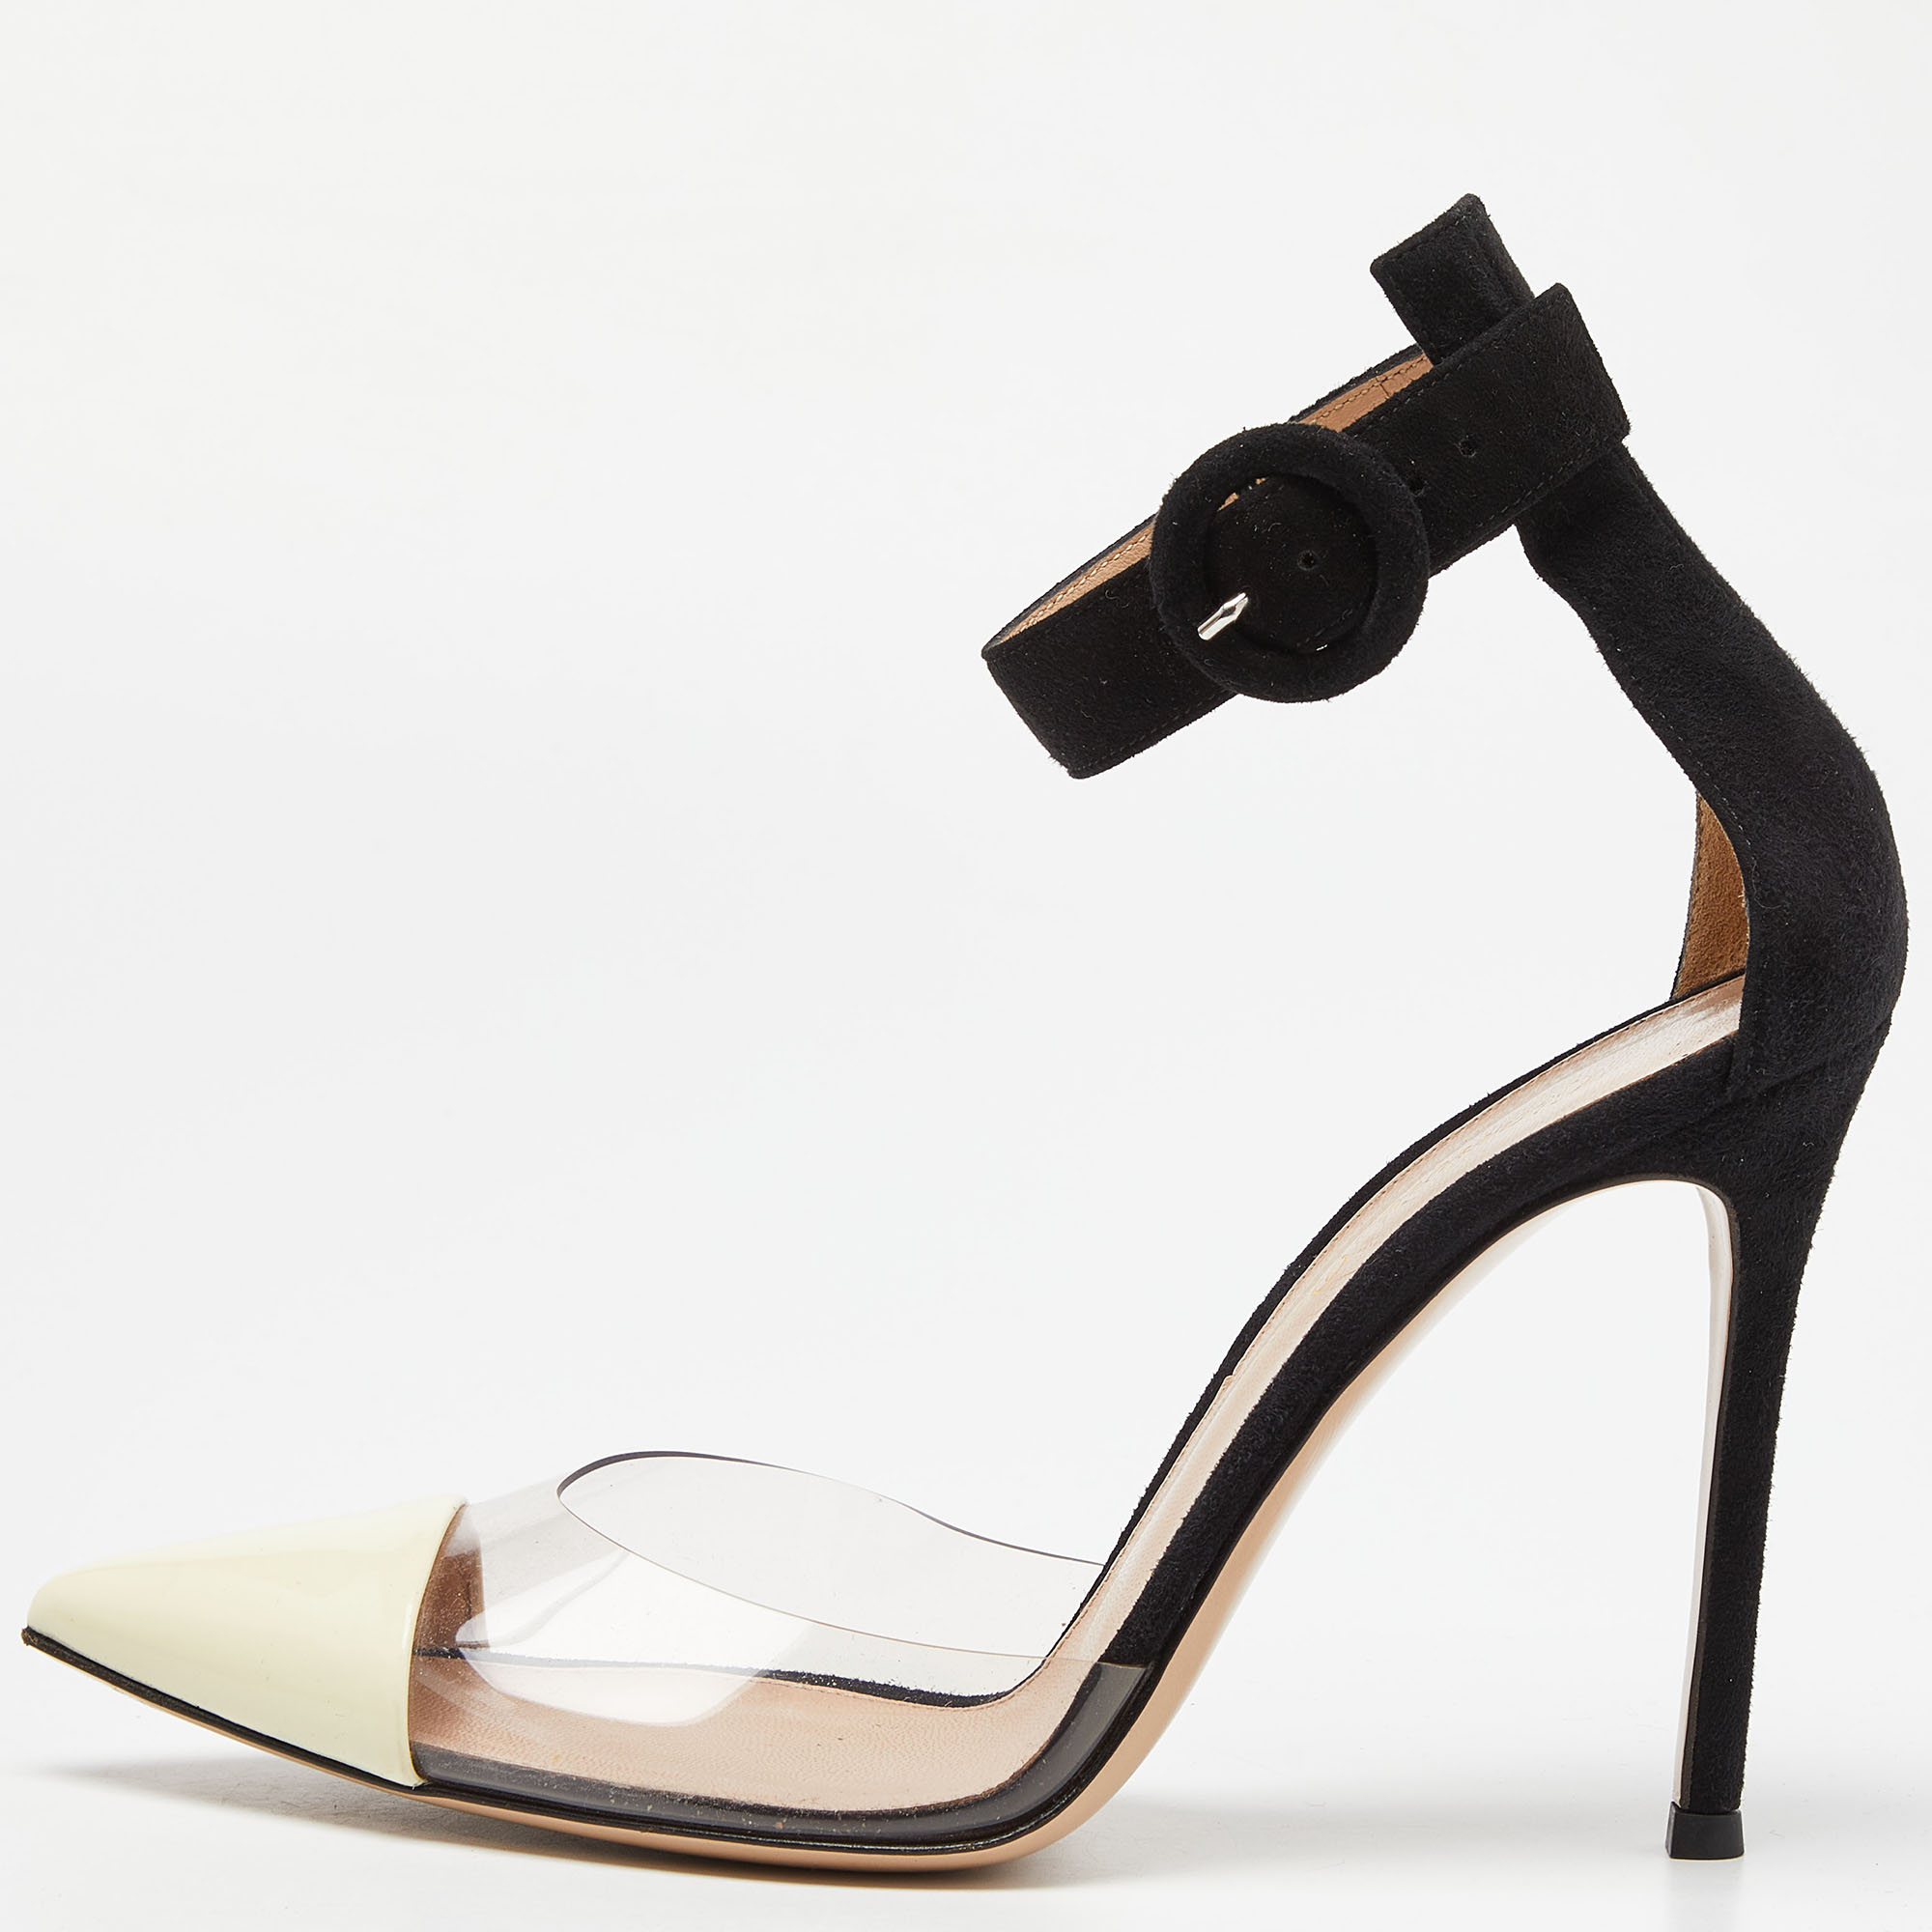 Pre-owned Gianvito Rossi Black/beige Suede Patent Leather And Pvc Ankle Strap Sandals Size 37.5